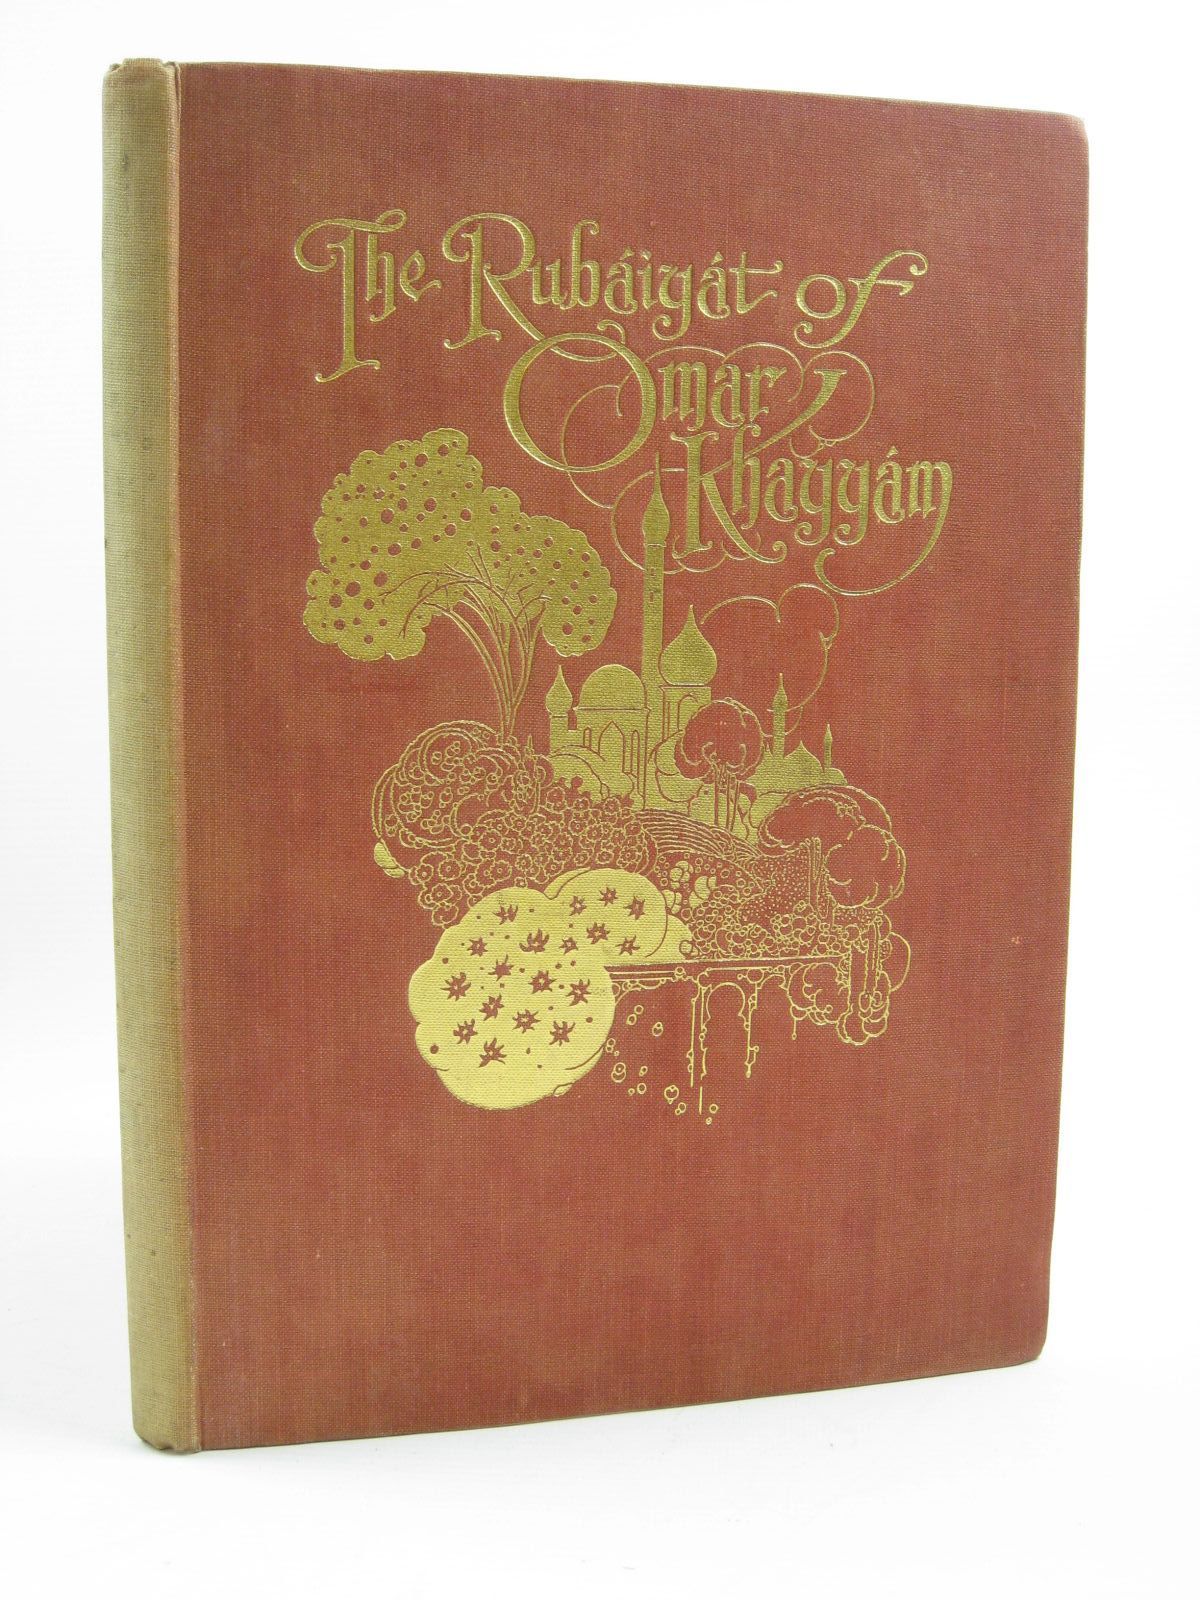 Photo of THE RUBAIYAT OF OMAR KHAYYAM written by Khayyam, Omar
Fitzgerald, Edward
Housman, Laurence illustrated by Robinson, Charles published by Collins (STOCK CODE: 1406743)  for sale by Stella & Rose's Books